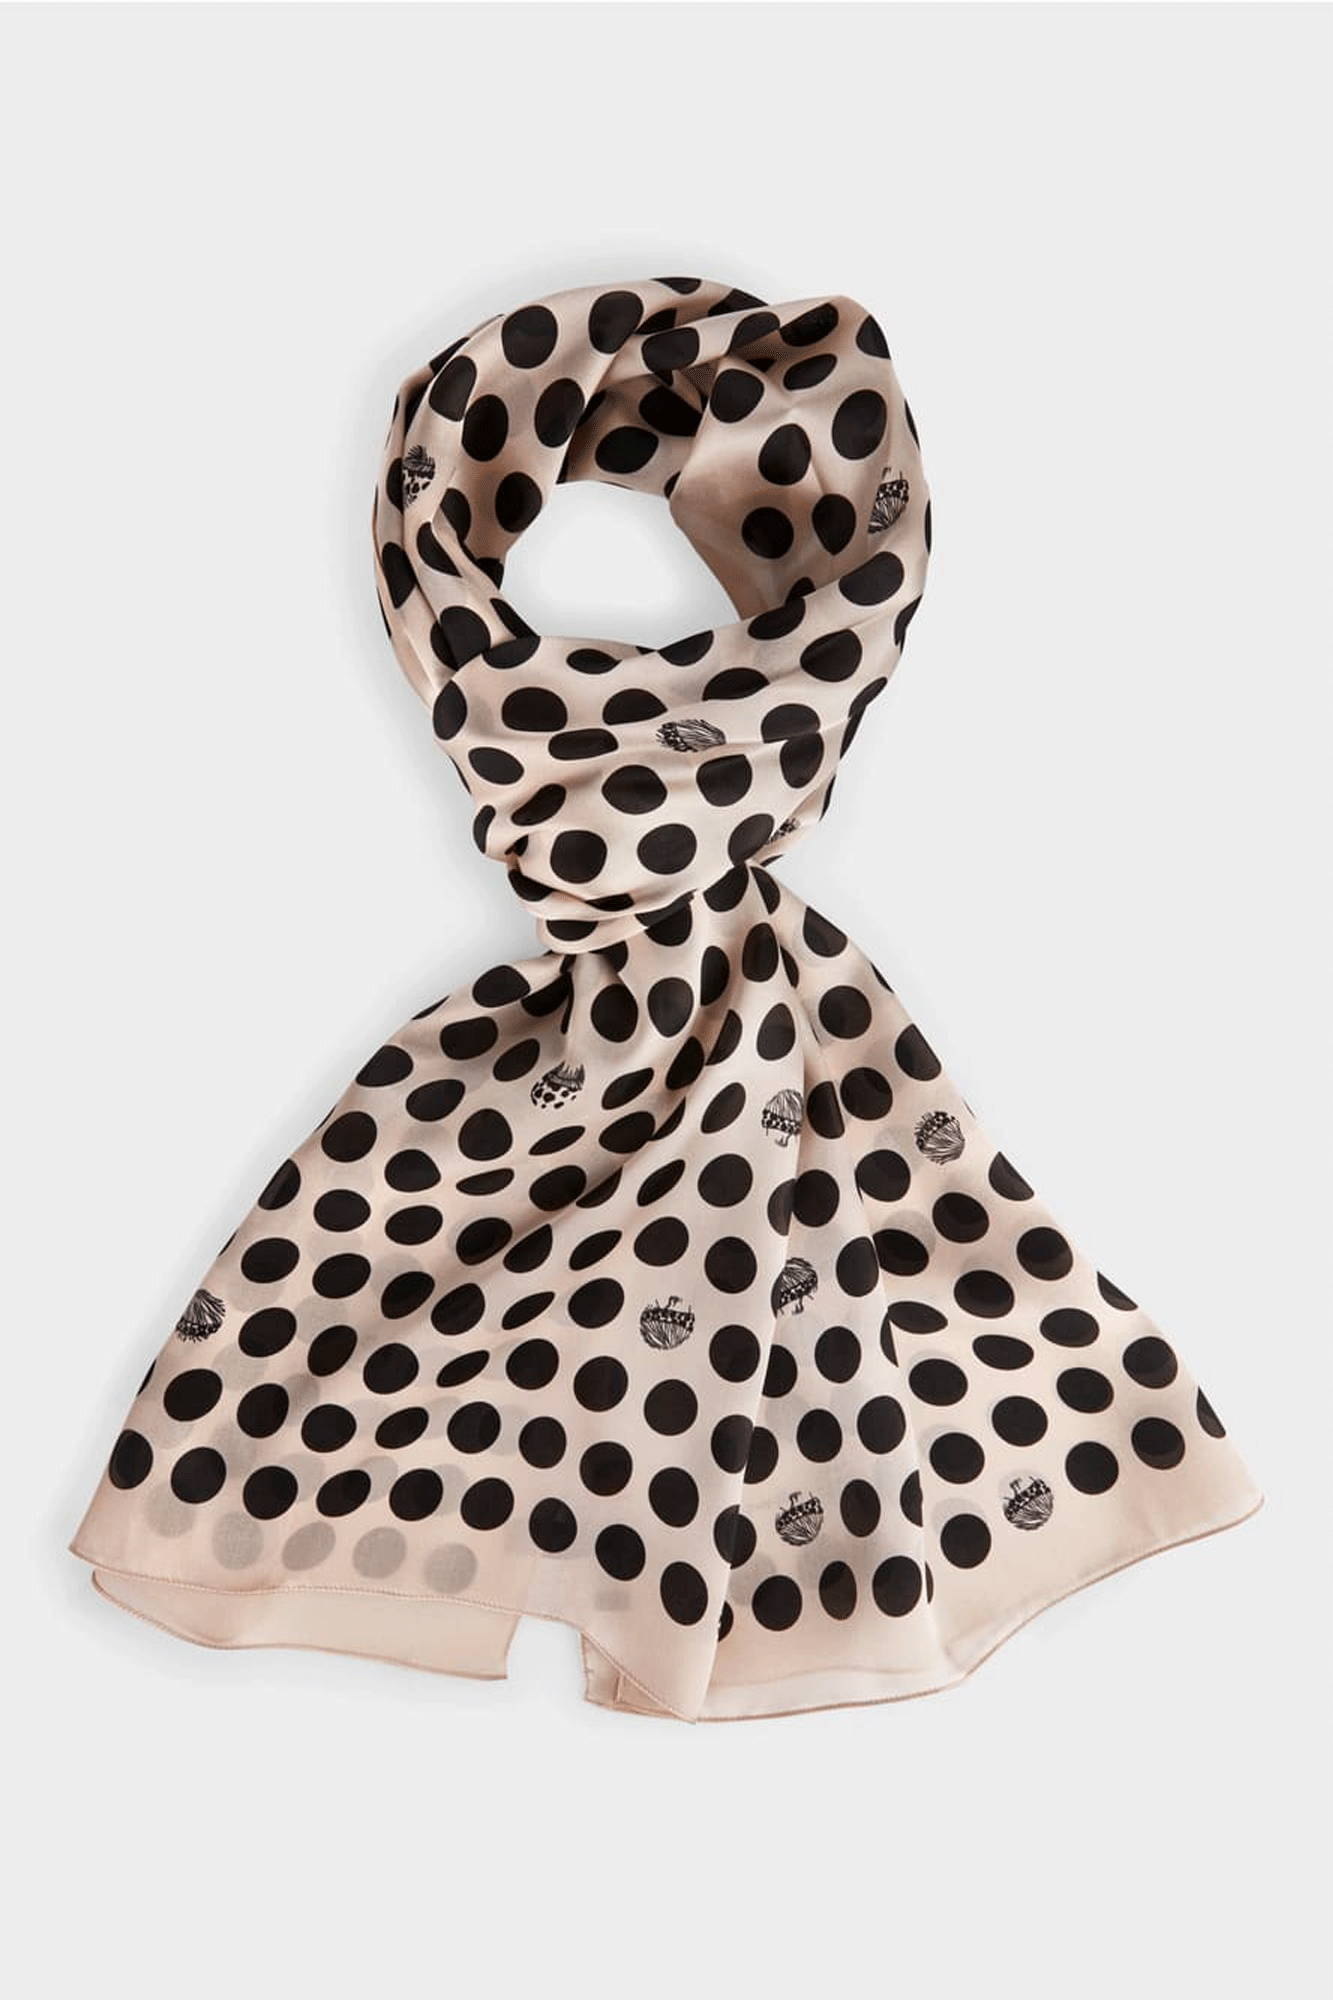 Stay stylish with the Sparkling Mushrooms Scarf from Marc Cain, made with elegant silk and featuring a sophisticated mushroom motif. This luxurious scarf is finely stitched on all edges and printed all over to create an eye-catching look.